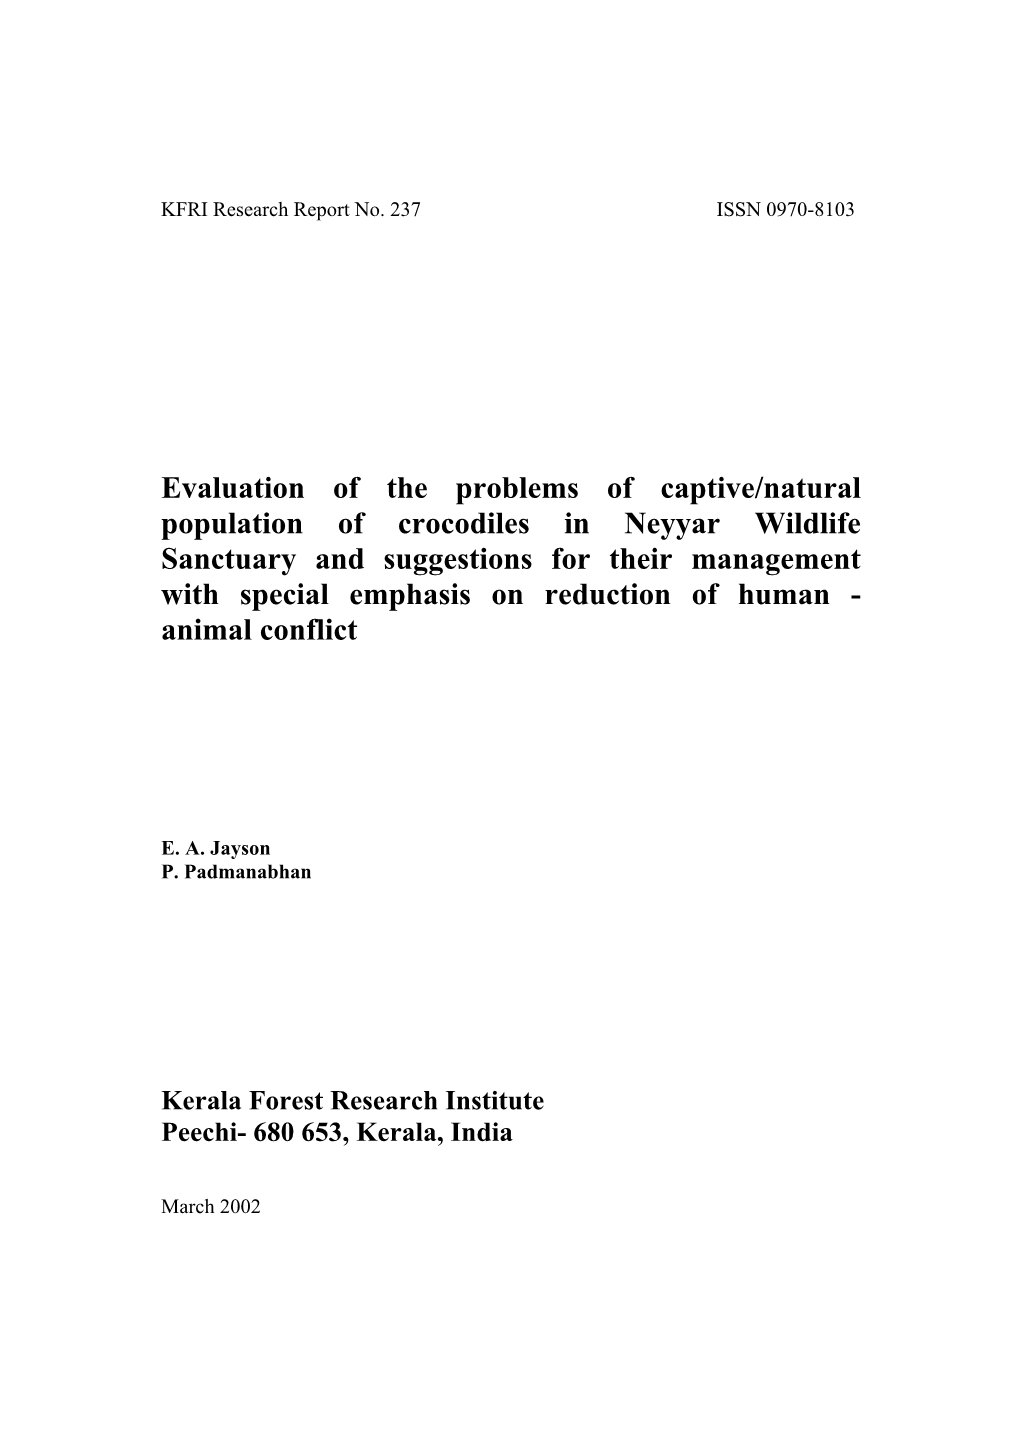 Evaluation of the Problems of Captive/Natural Population Of